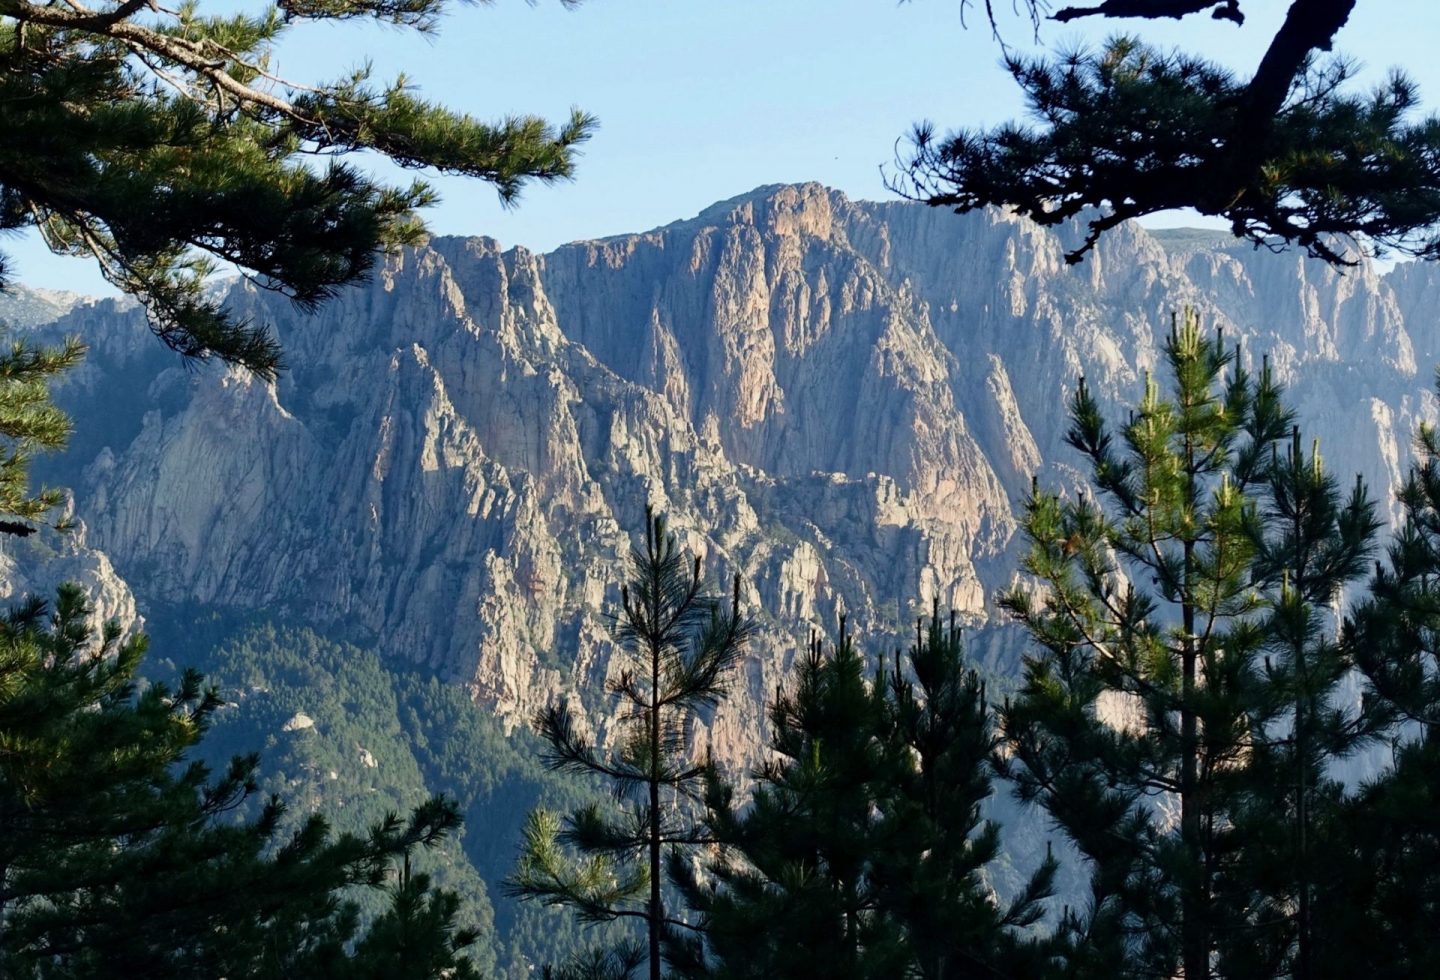 A mountain face in the distance, framed my pine trees at close distance, what to expect on the GR20